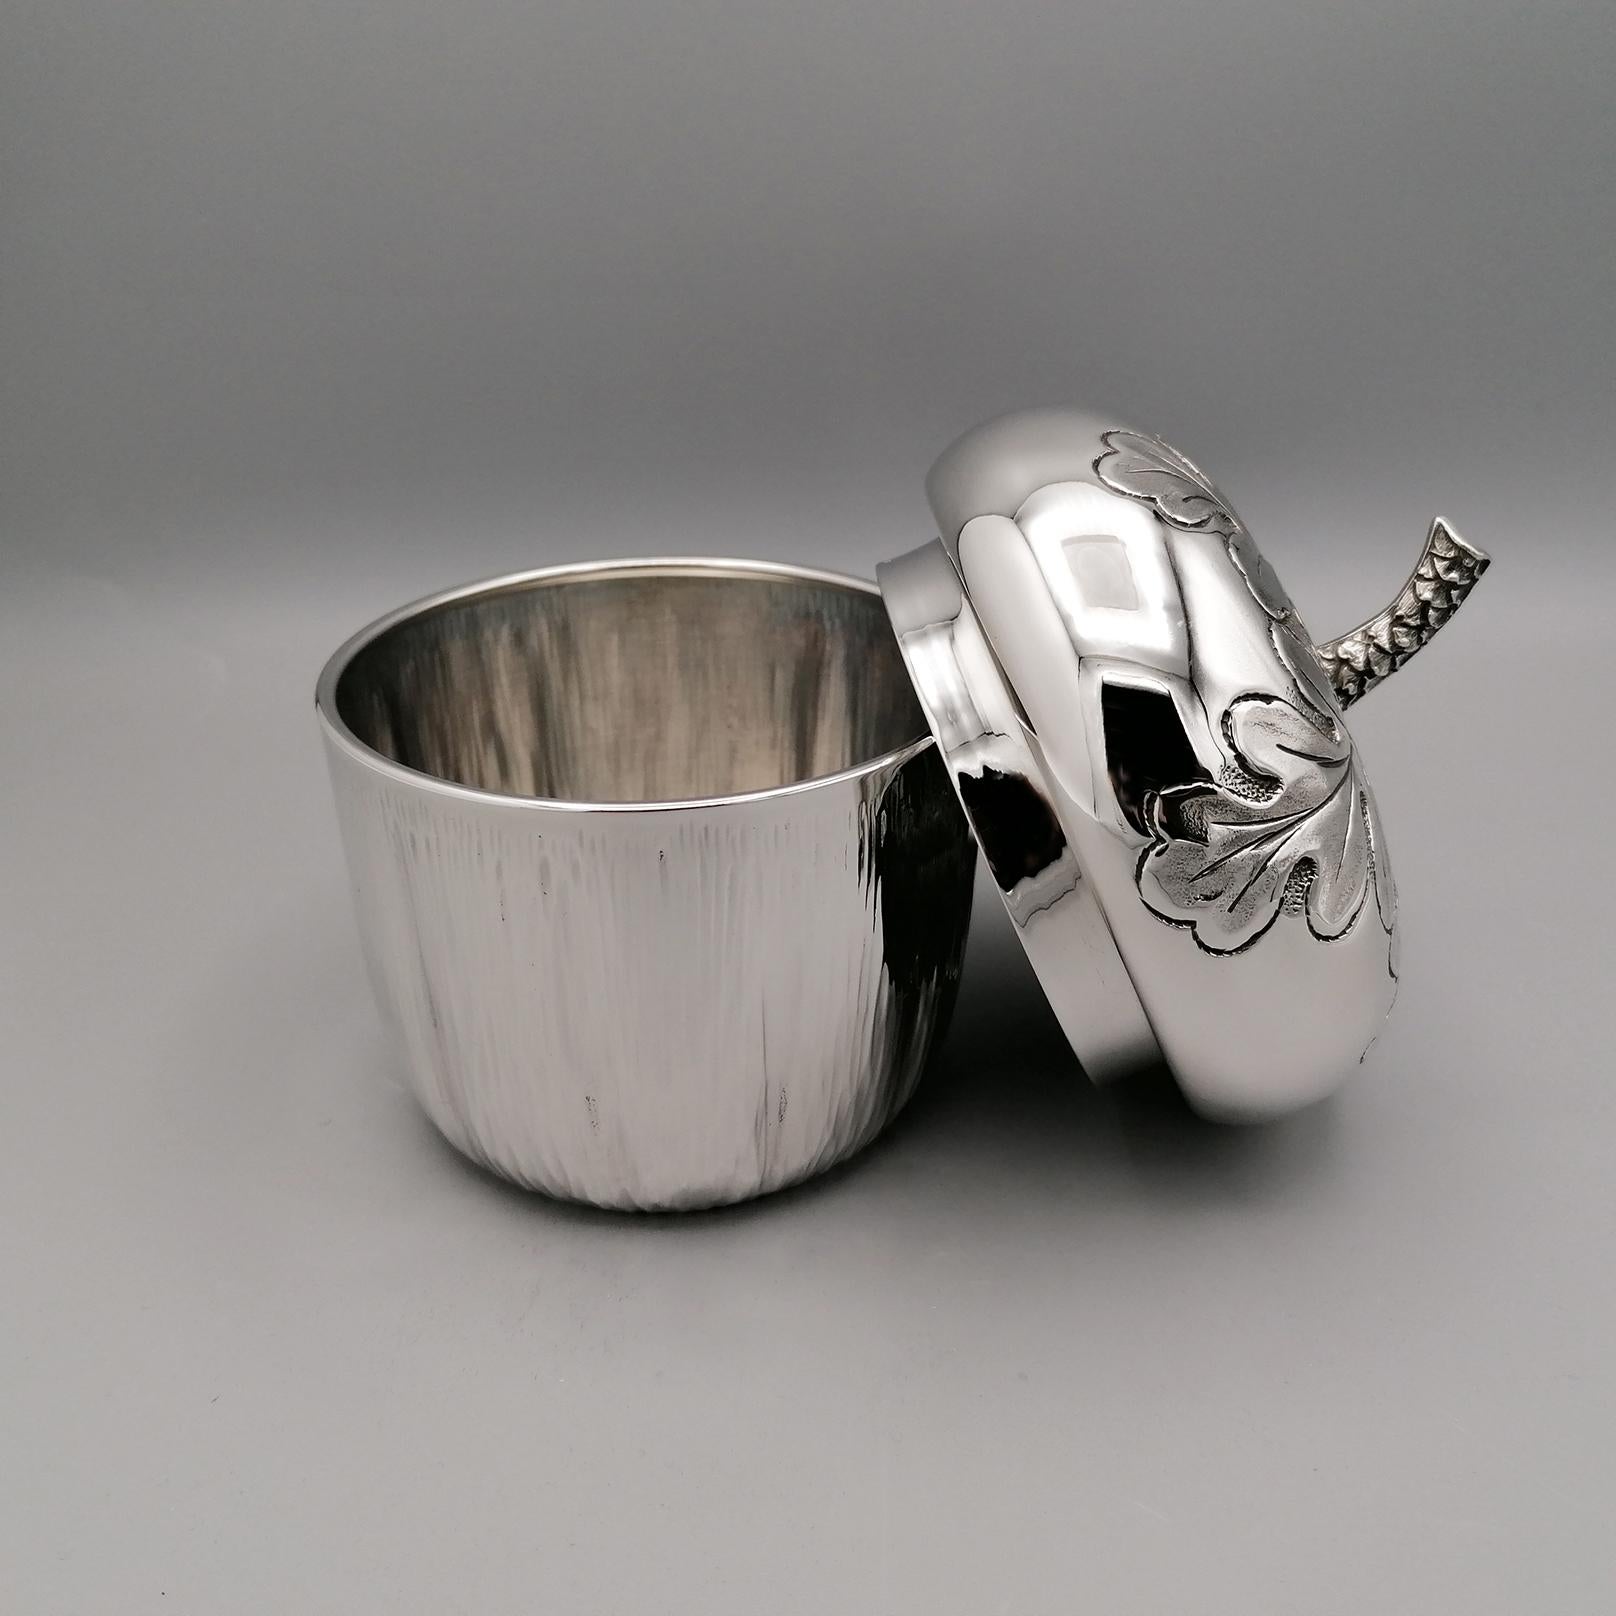 20th Century Italian Silver Box Embossed and Chiselled by Hand Acorn Shape For Sale 2